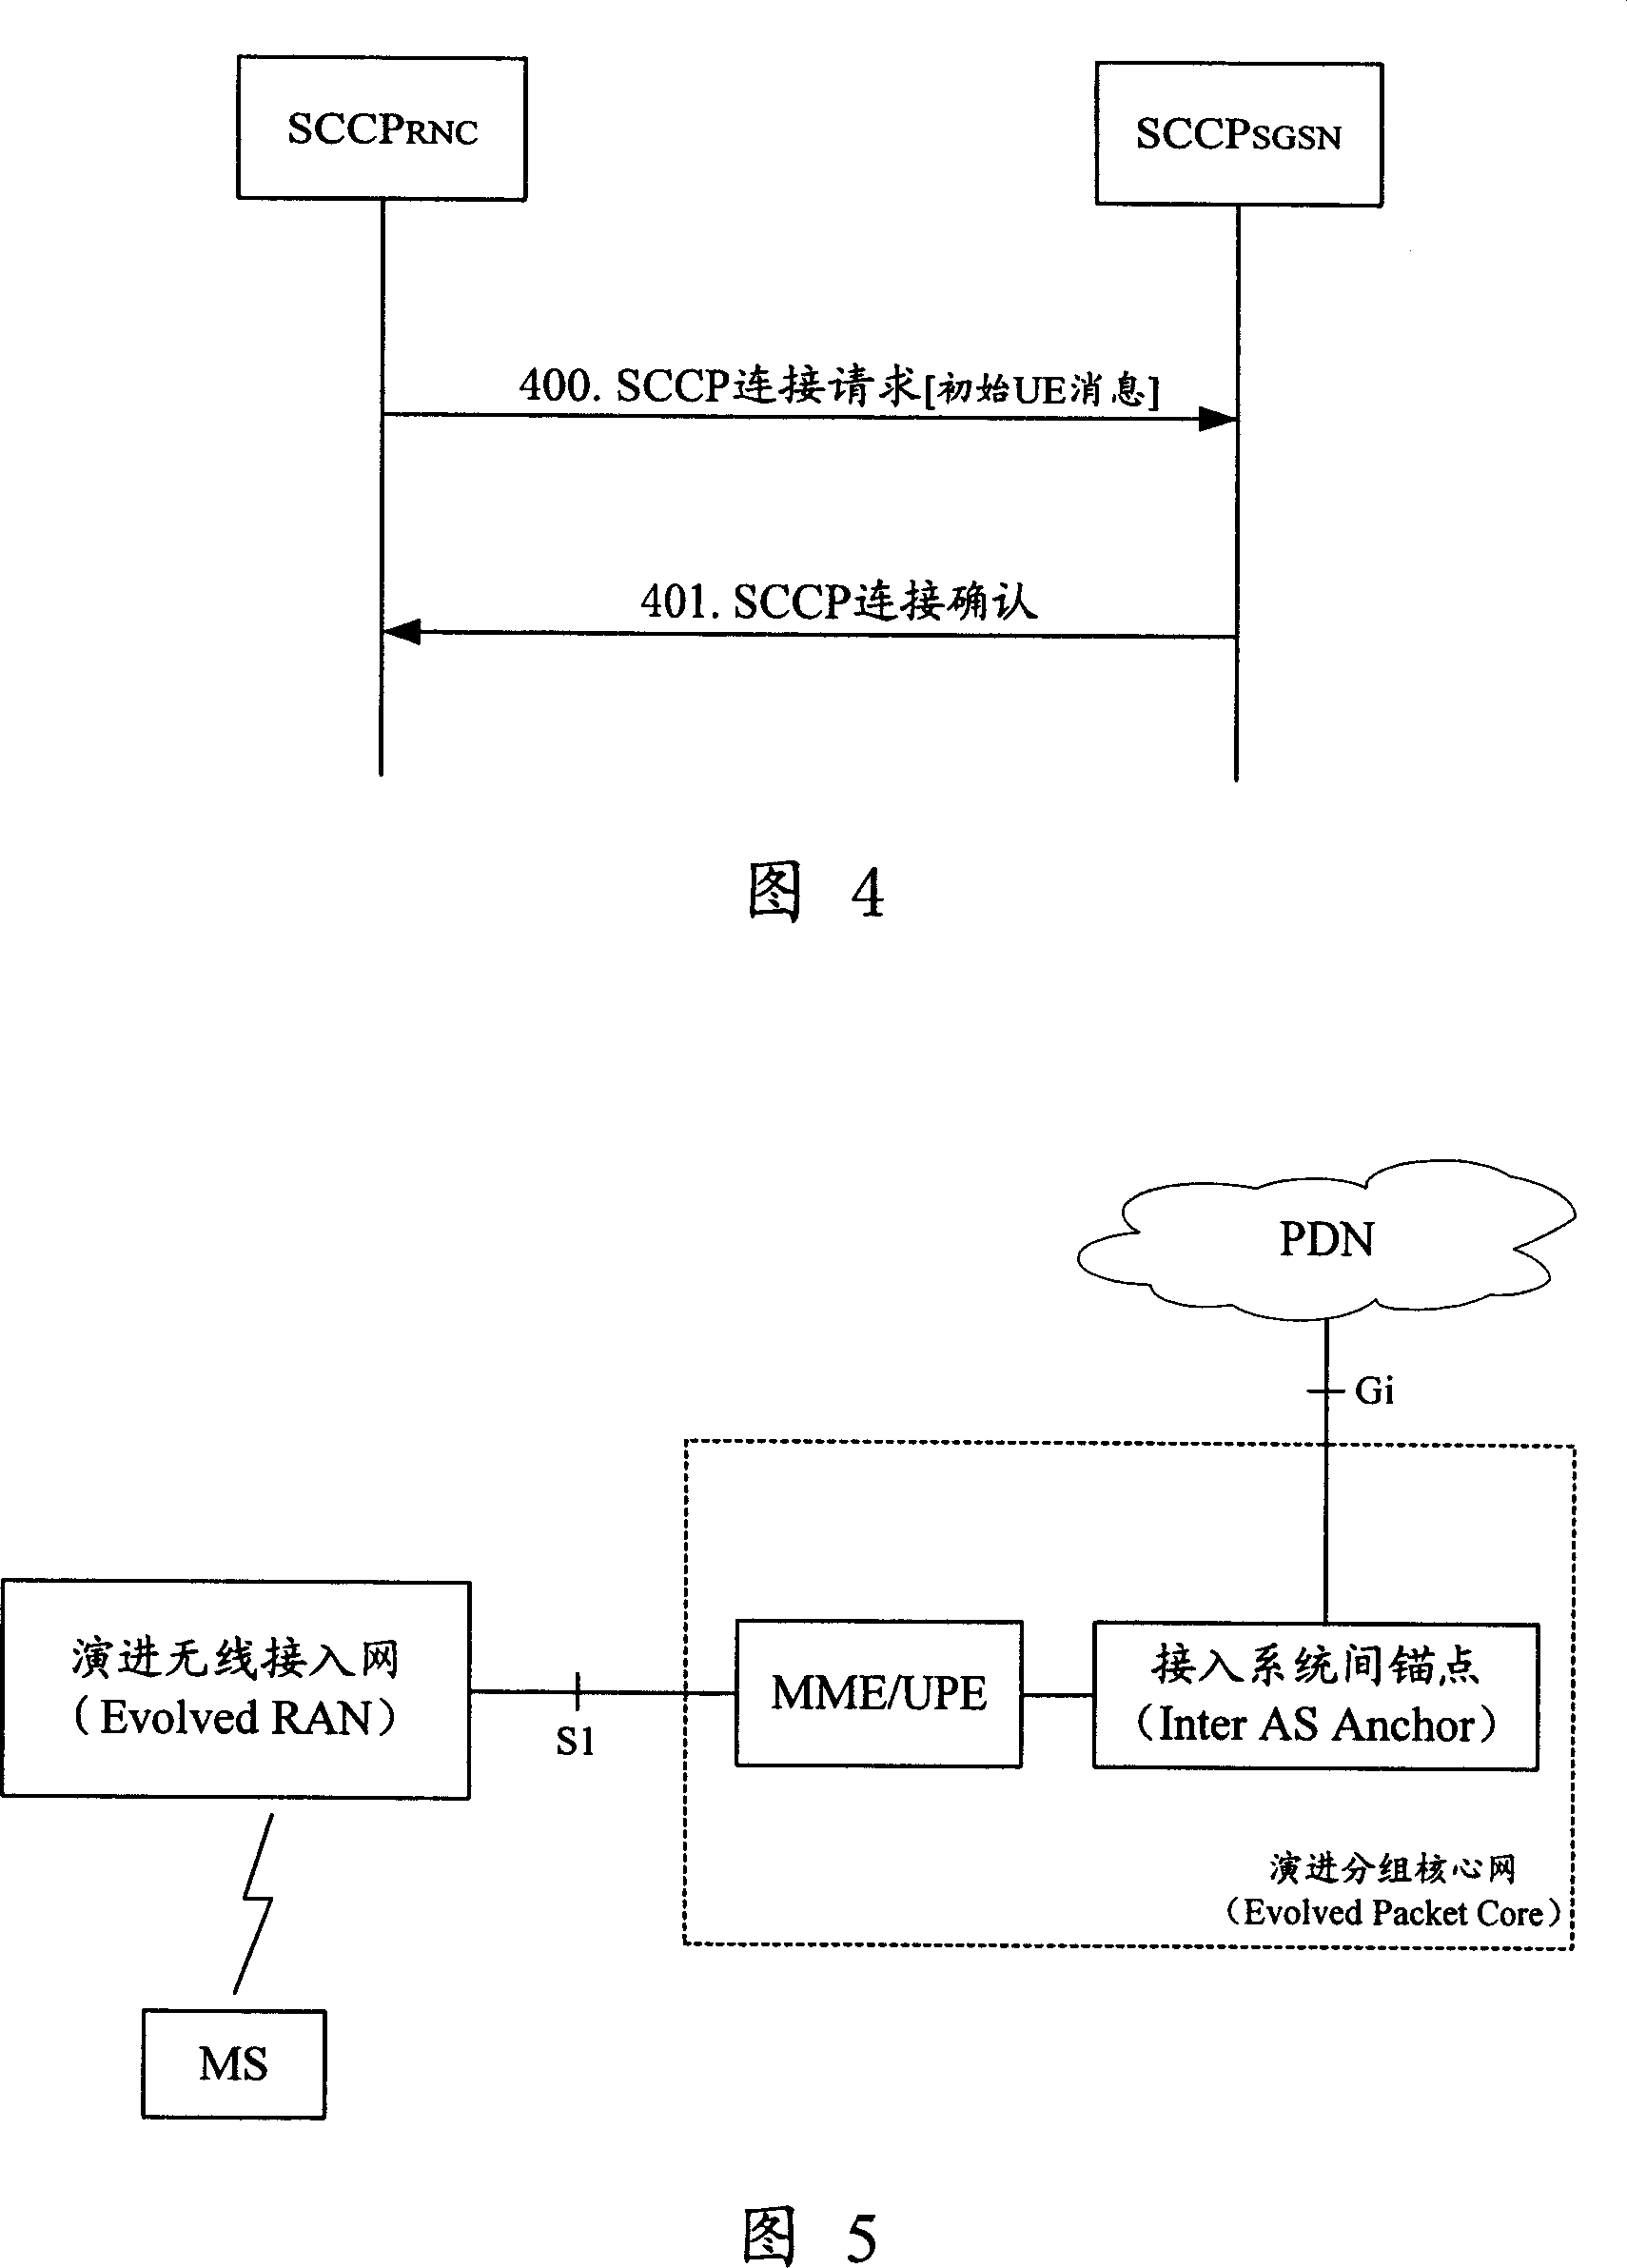 Method for establishing connection between mobile station and evolution packet core network